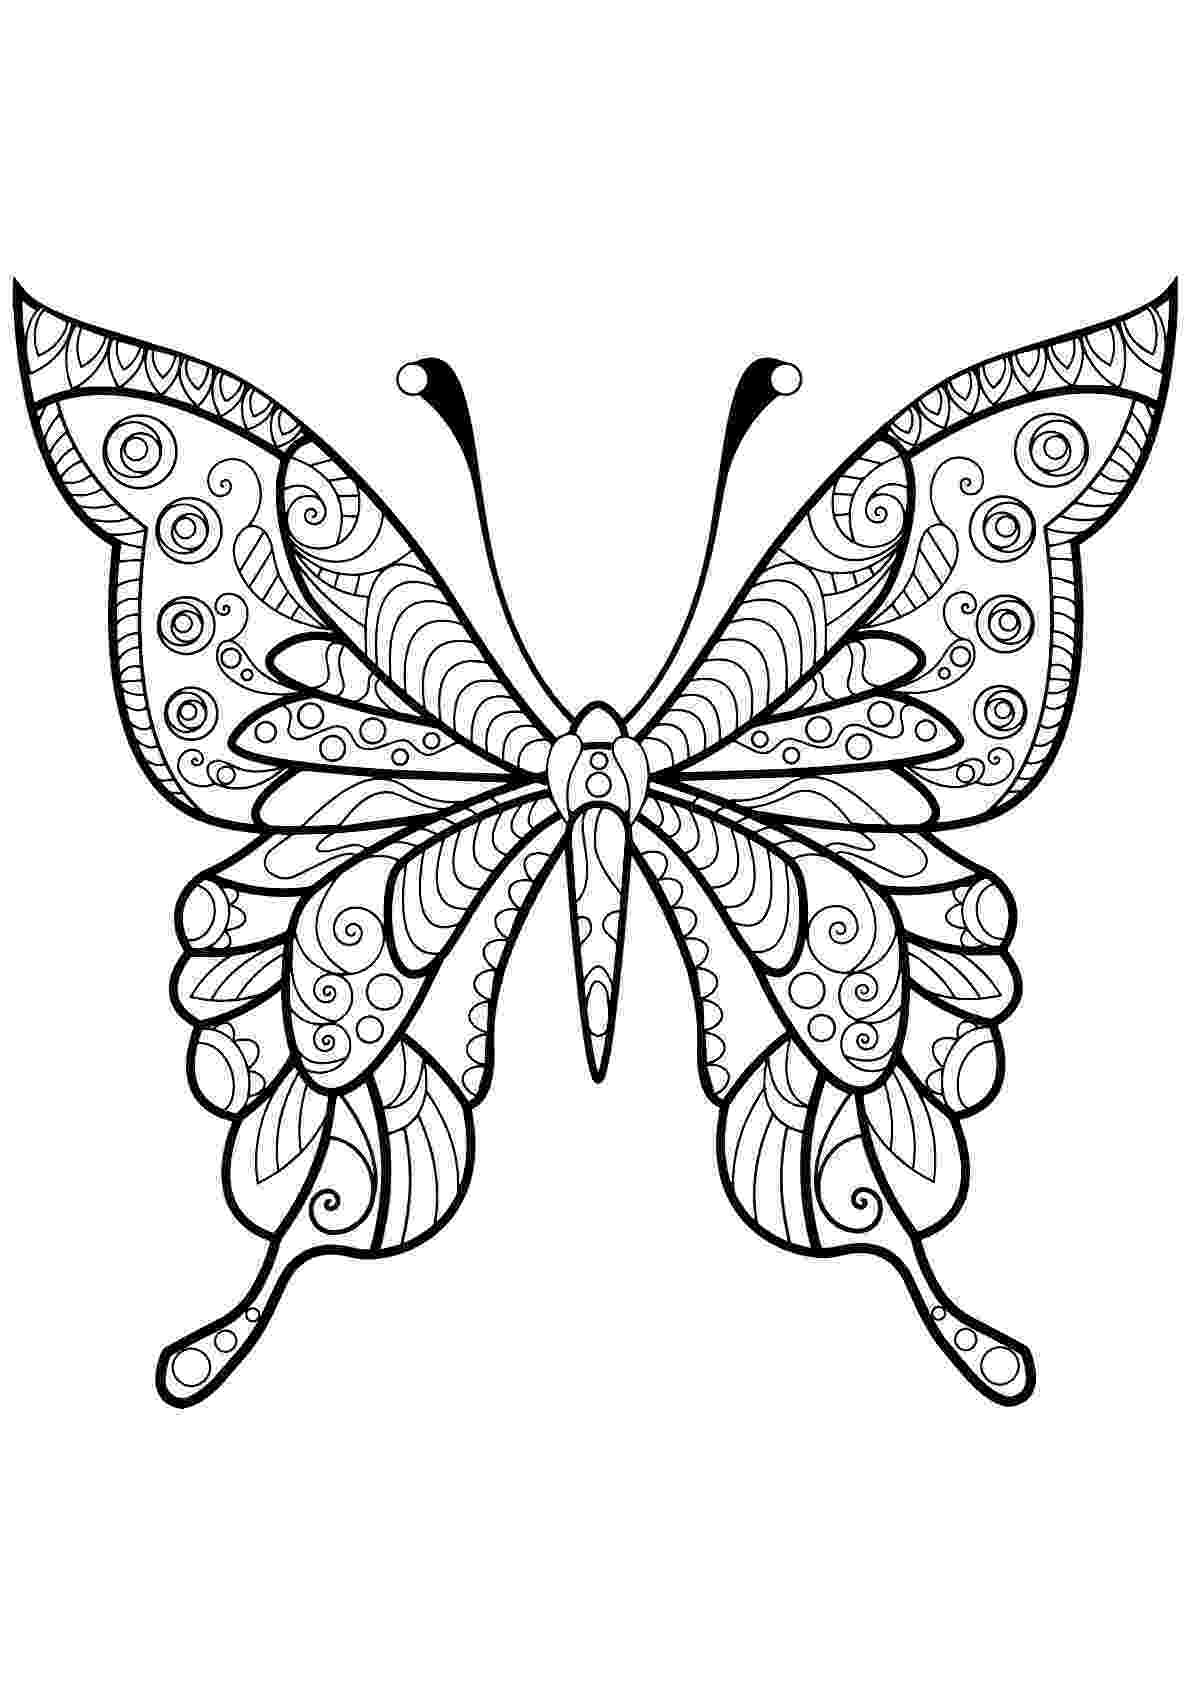 butterfly color pages free printable butterfly coloring pages for kids butterfly color pages 1 1